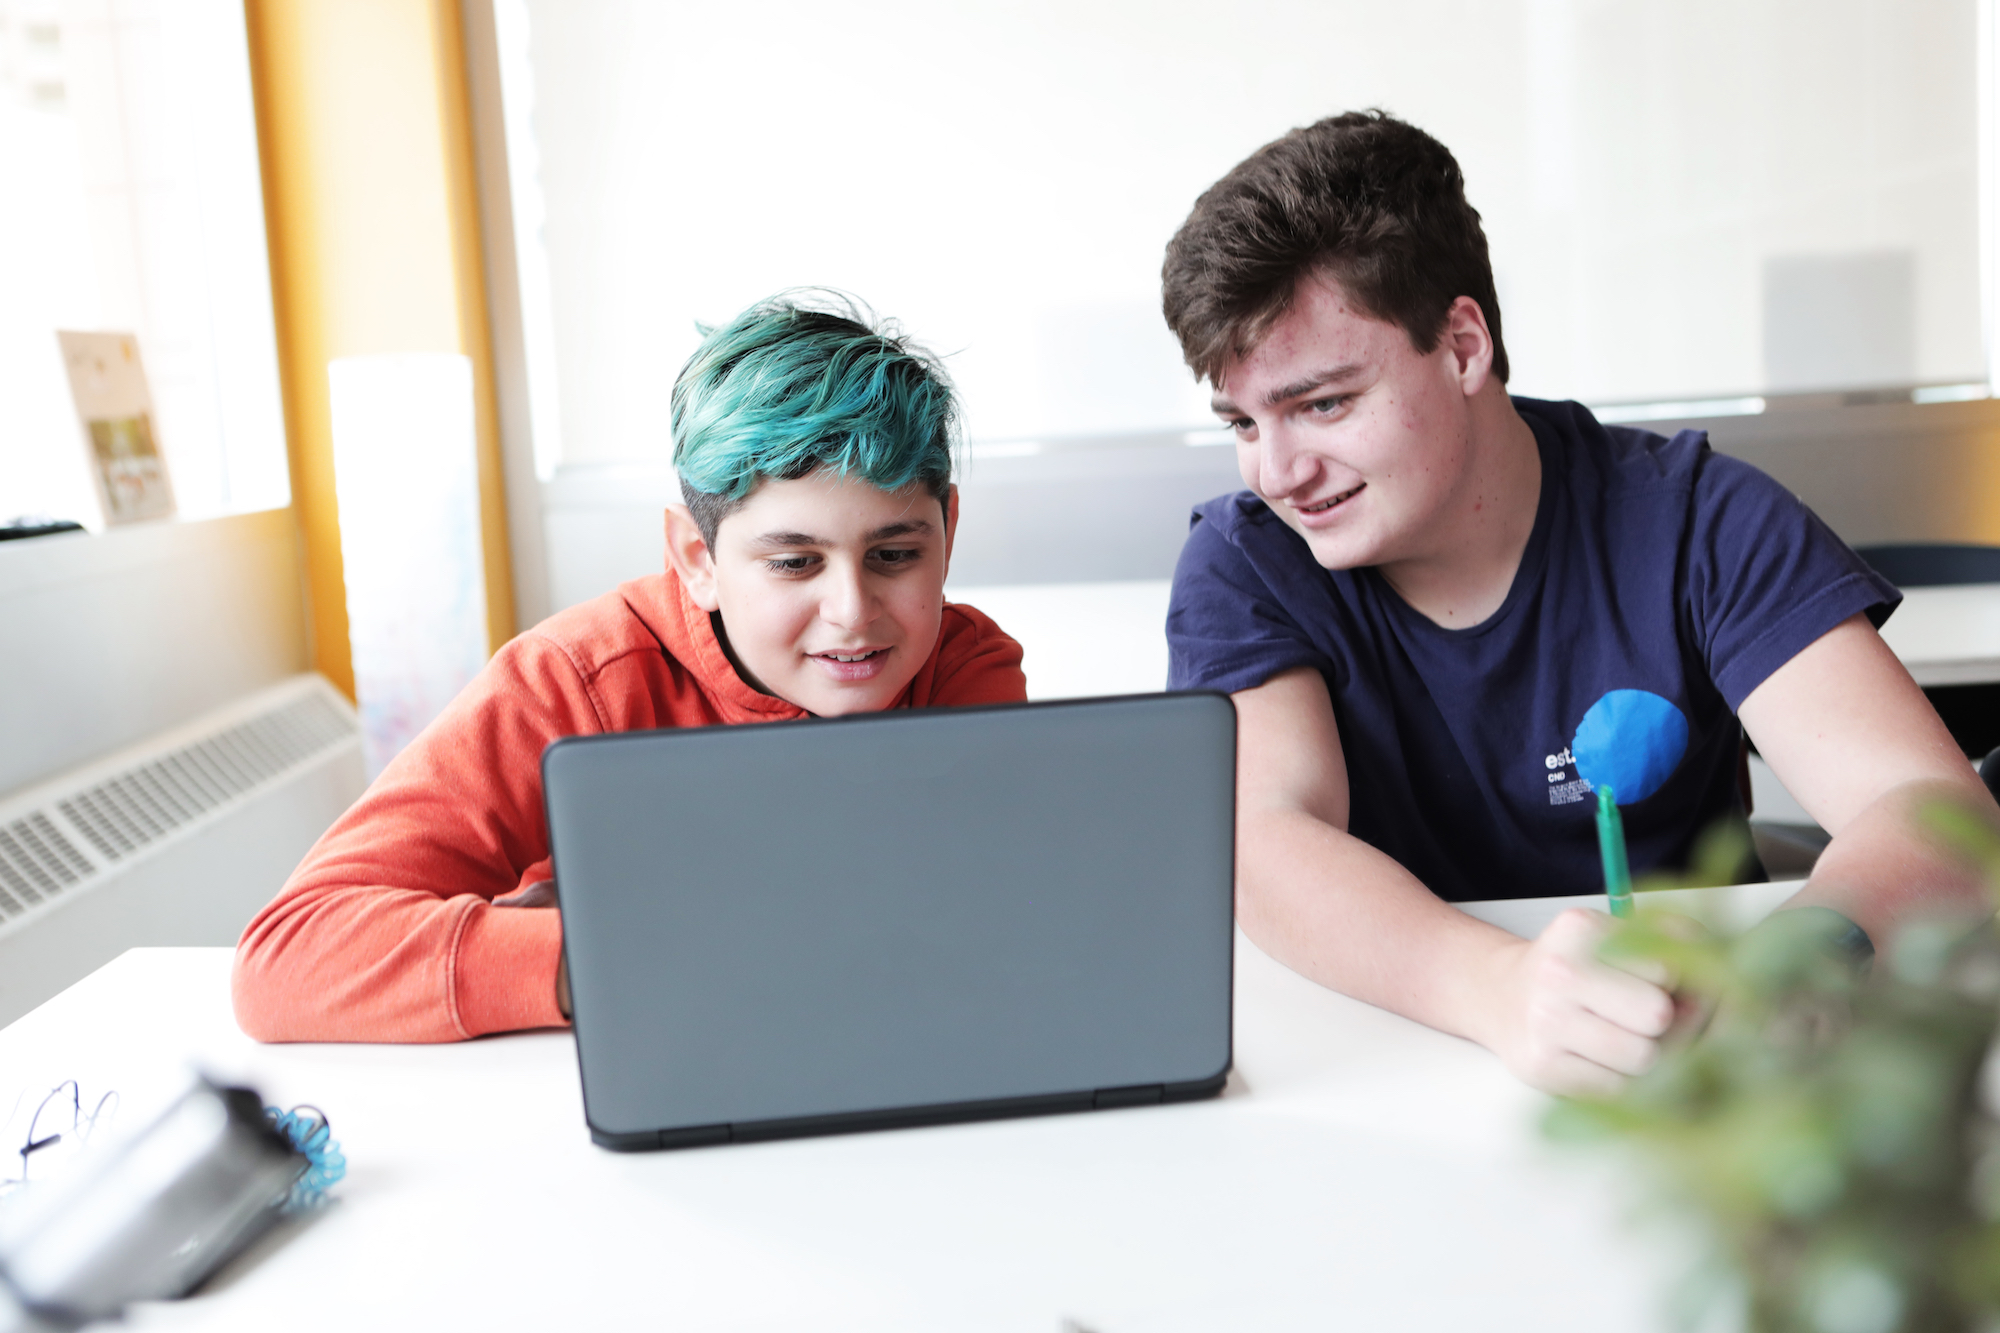 Two teenage boys watch something on a laptop.